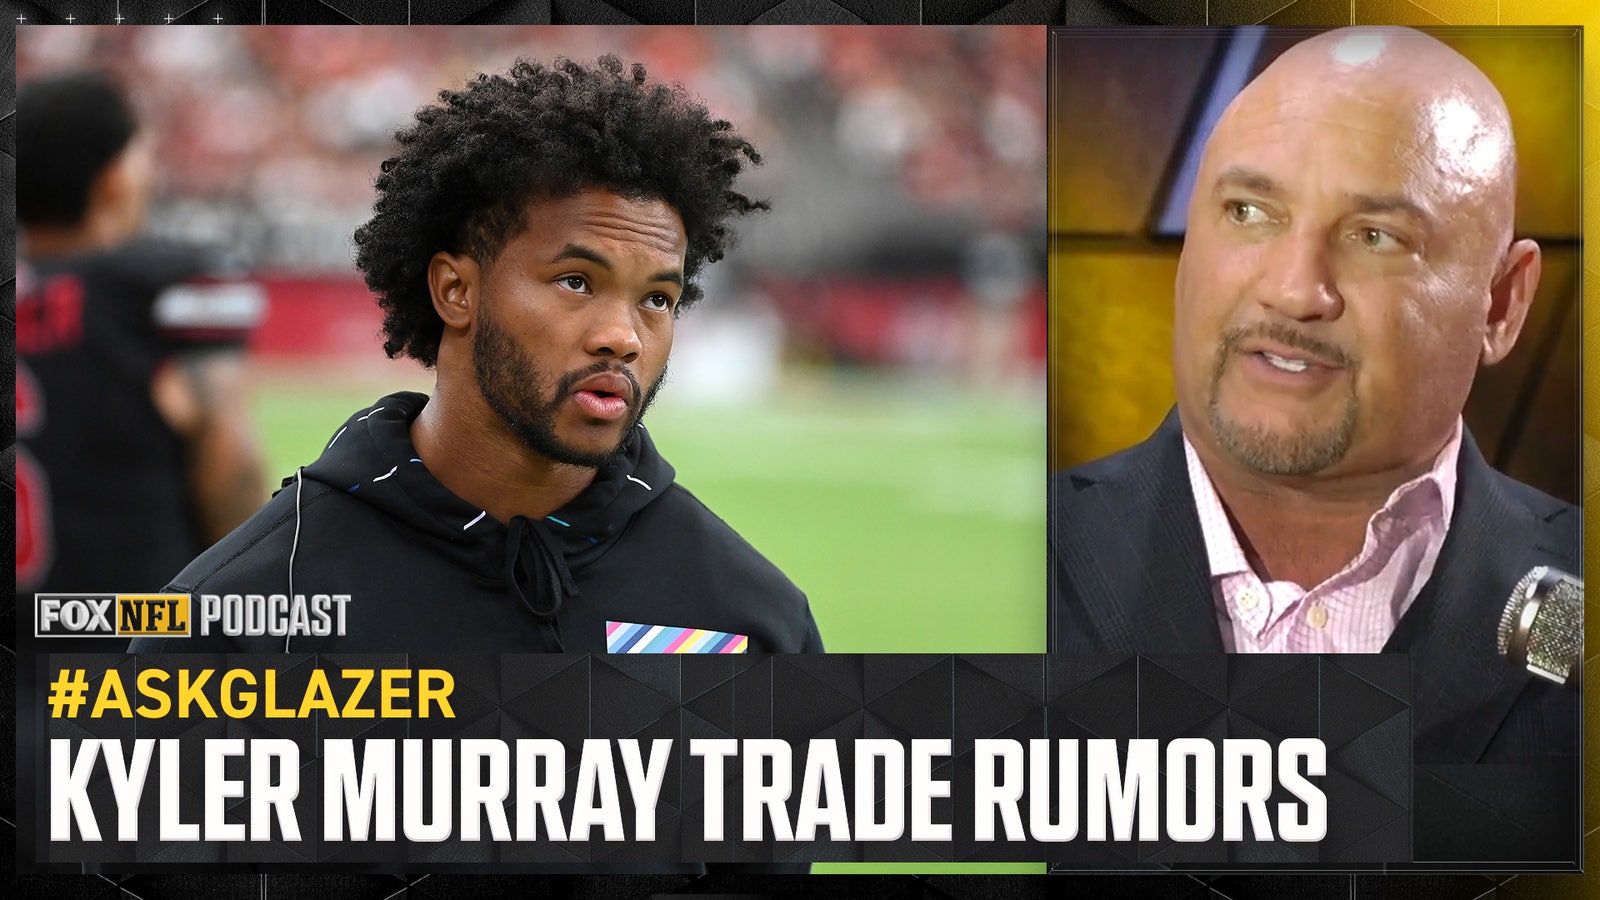 Jay Glazer on Kyler Murray rumors, if Bears will move off of Justin Fields